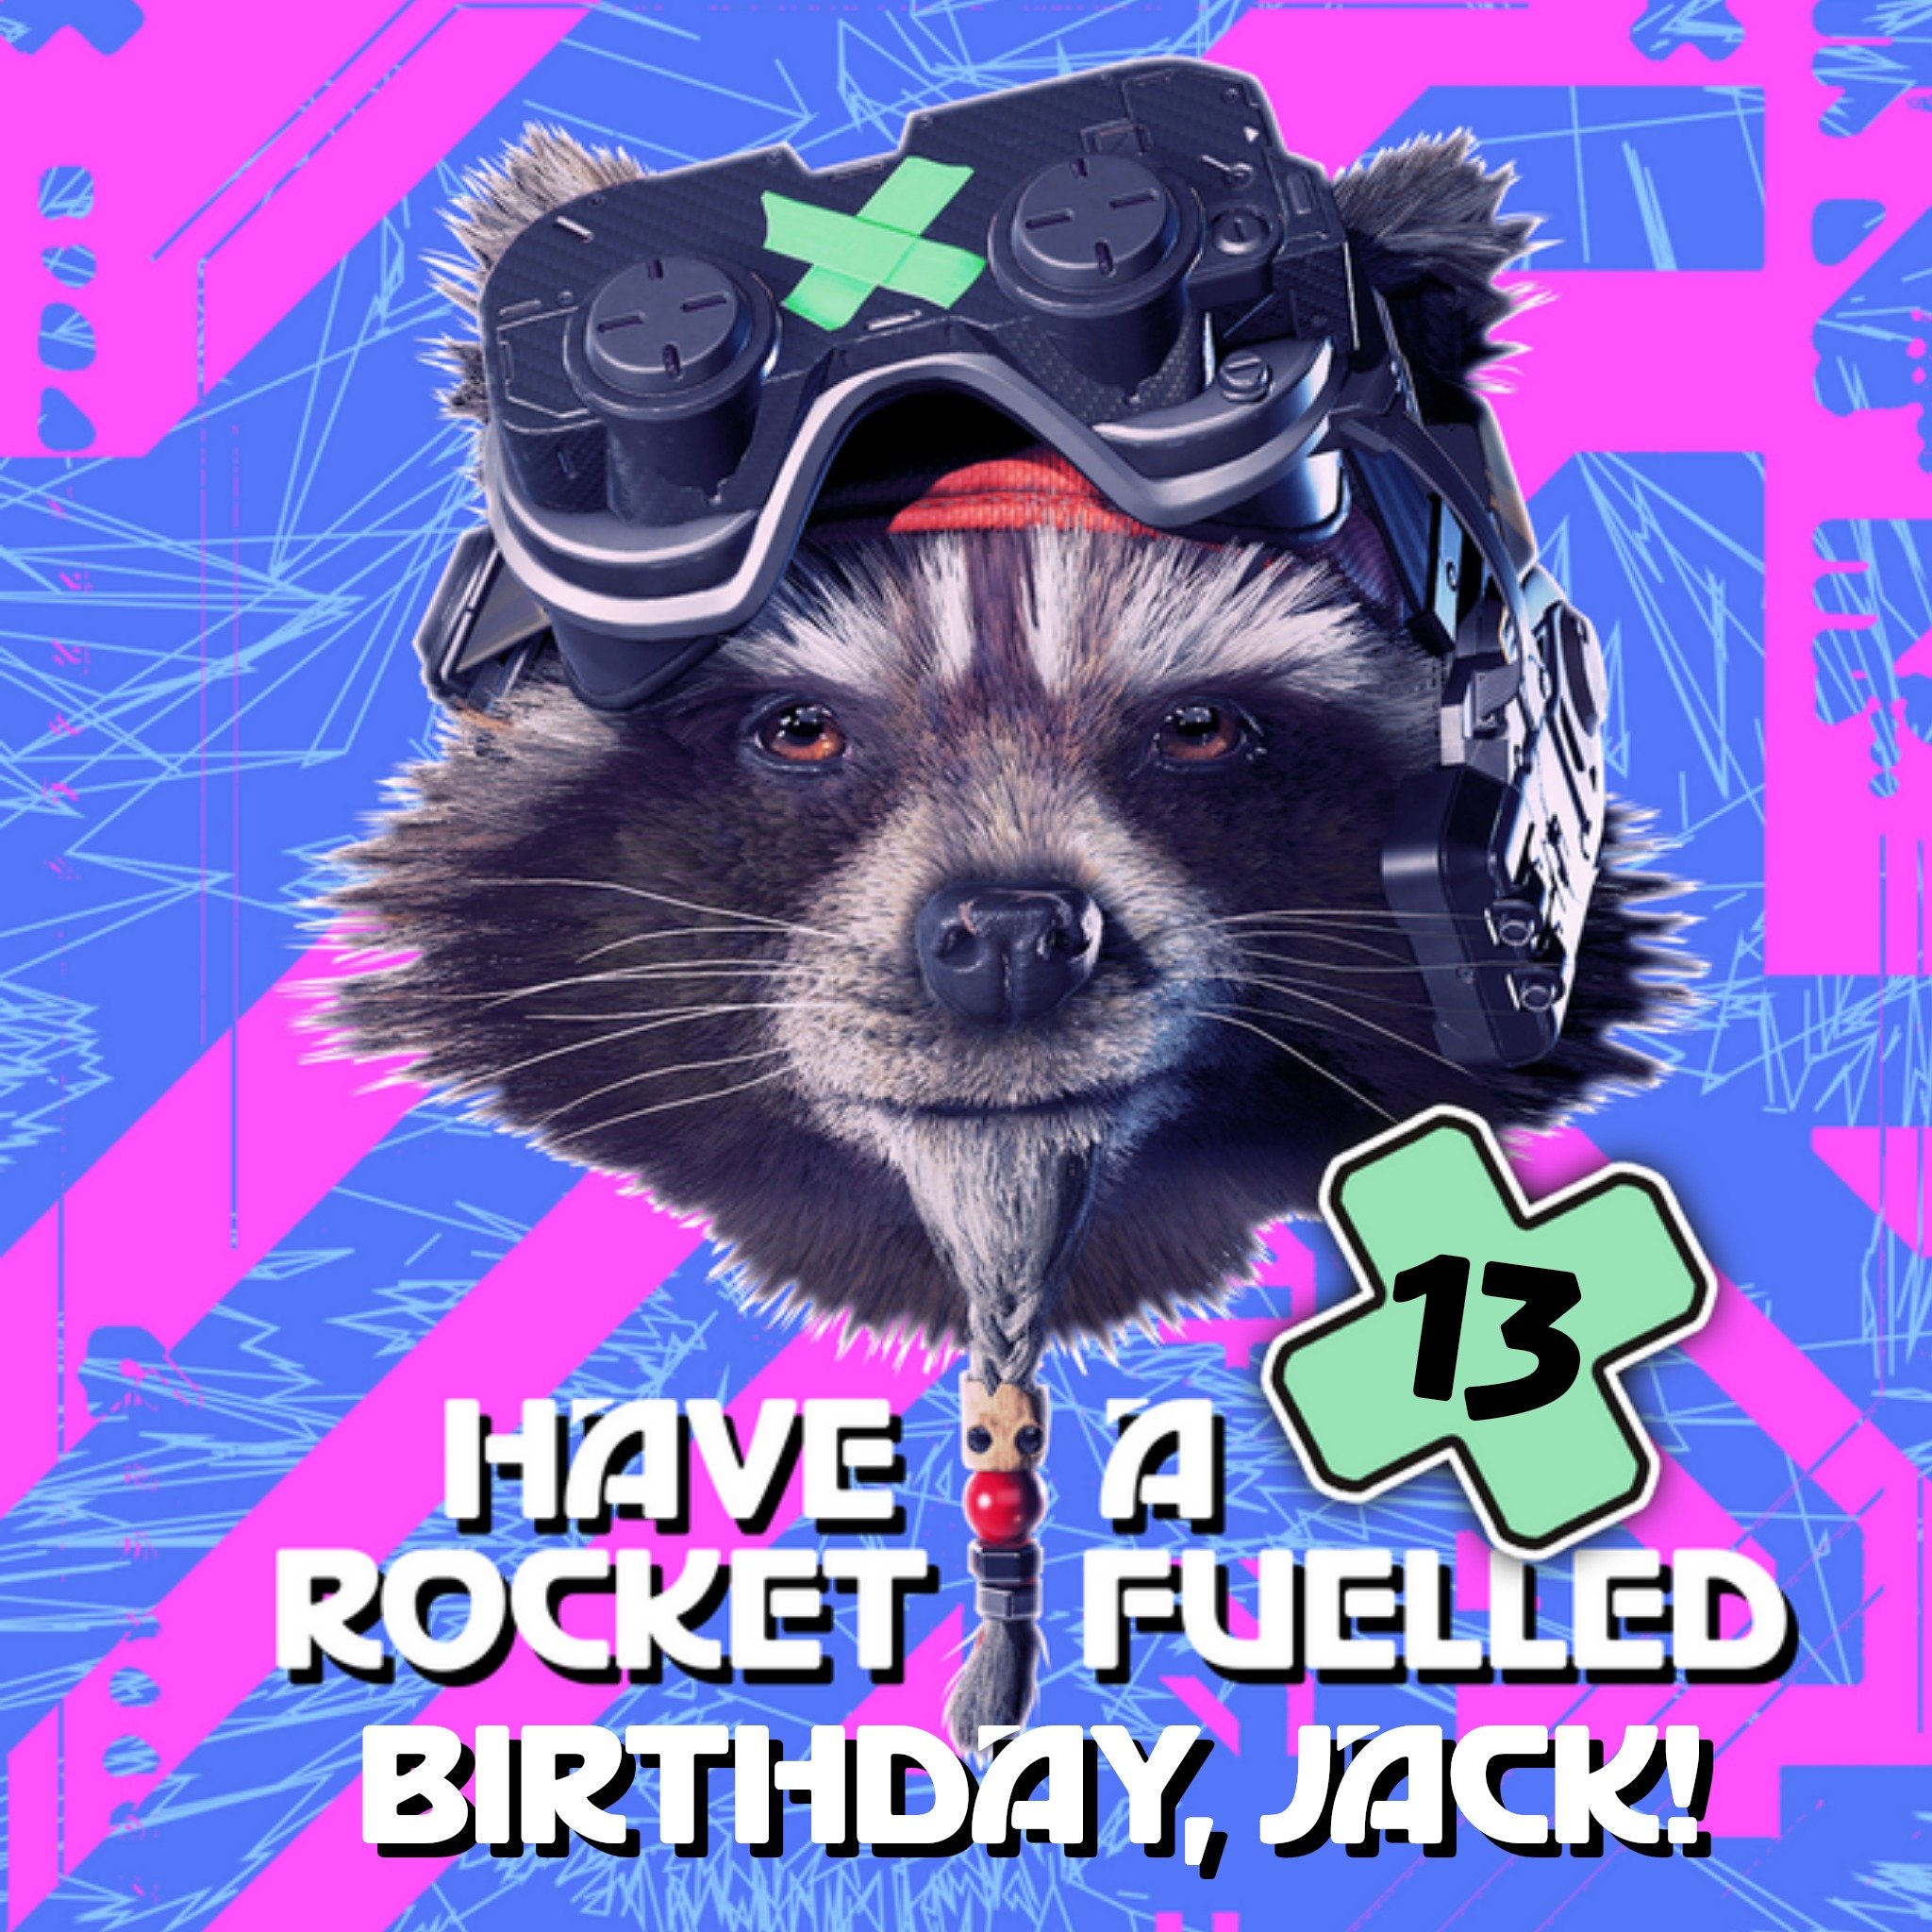 Marvel Guardians Of The Galaxy Rocket Fuelled Birthday Card, Large